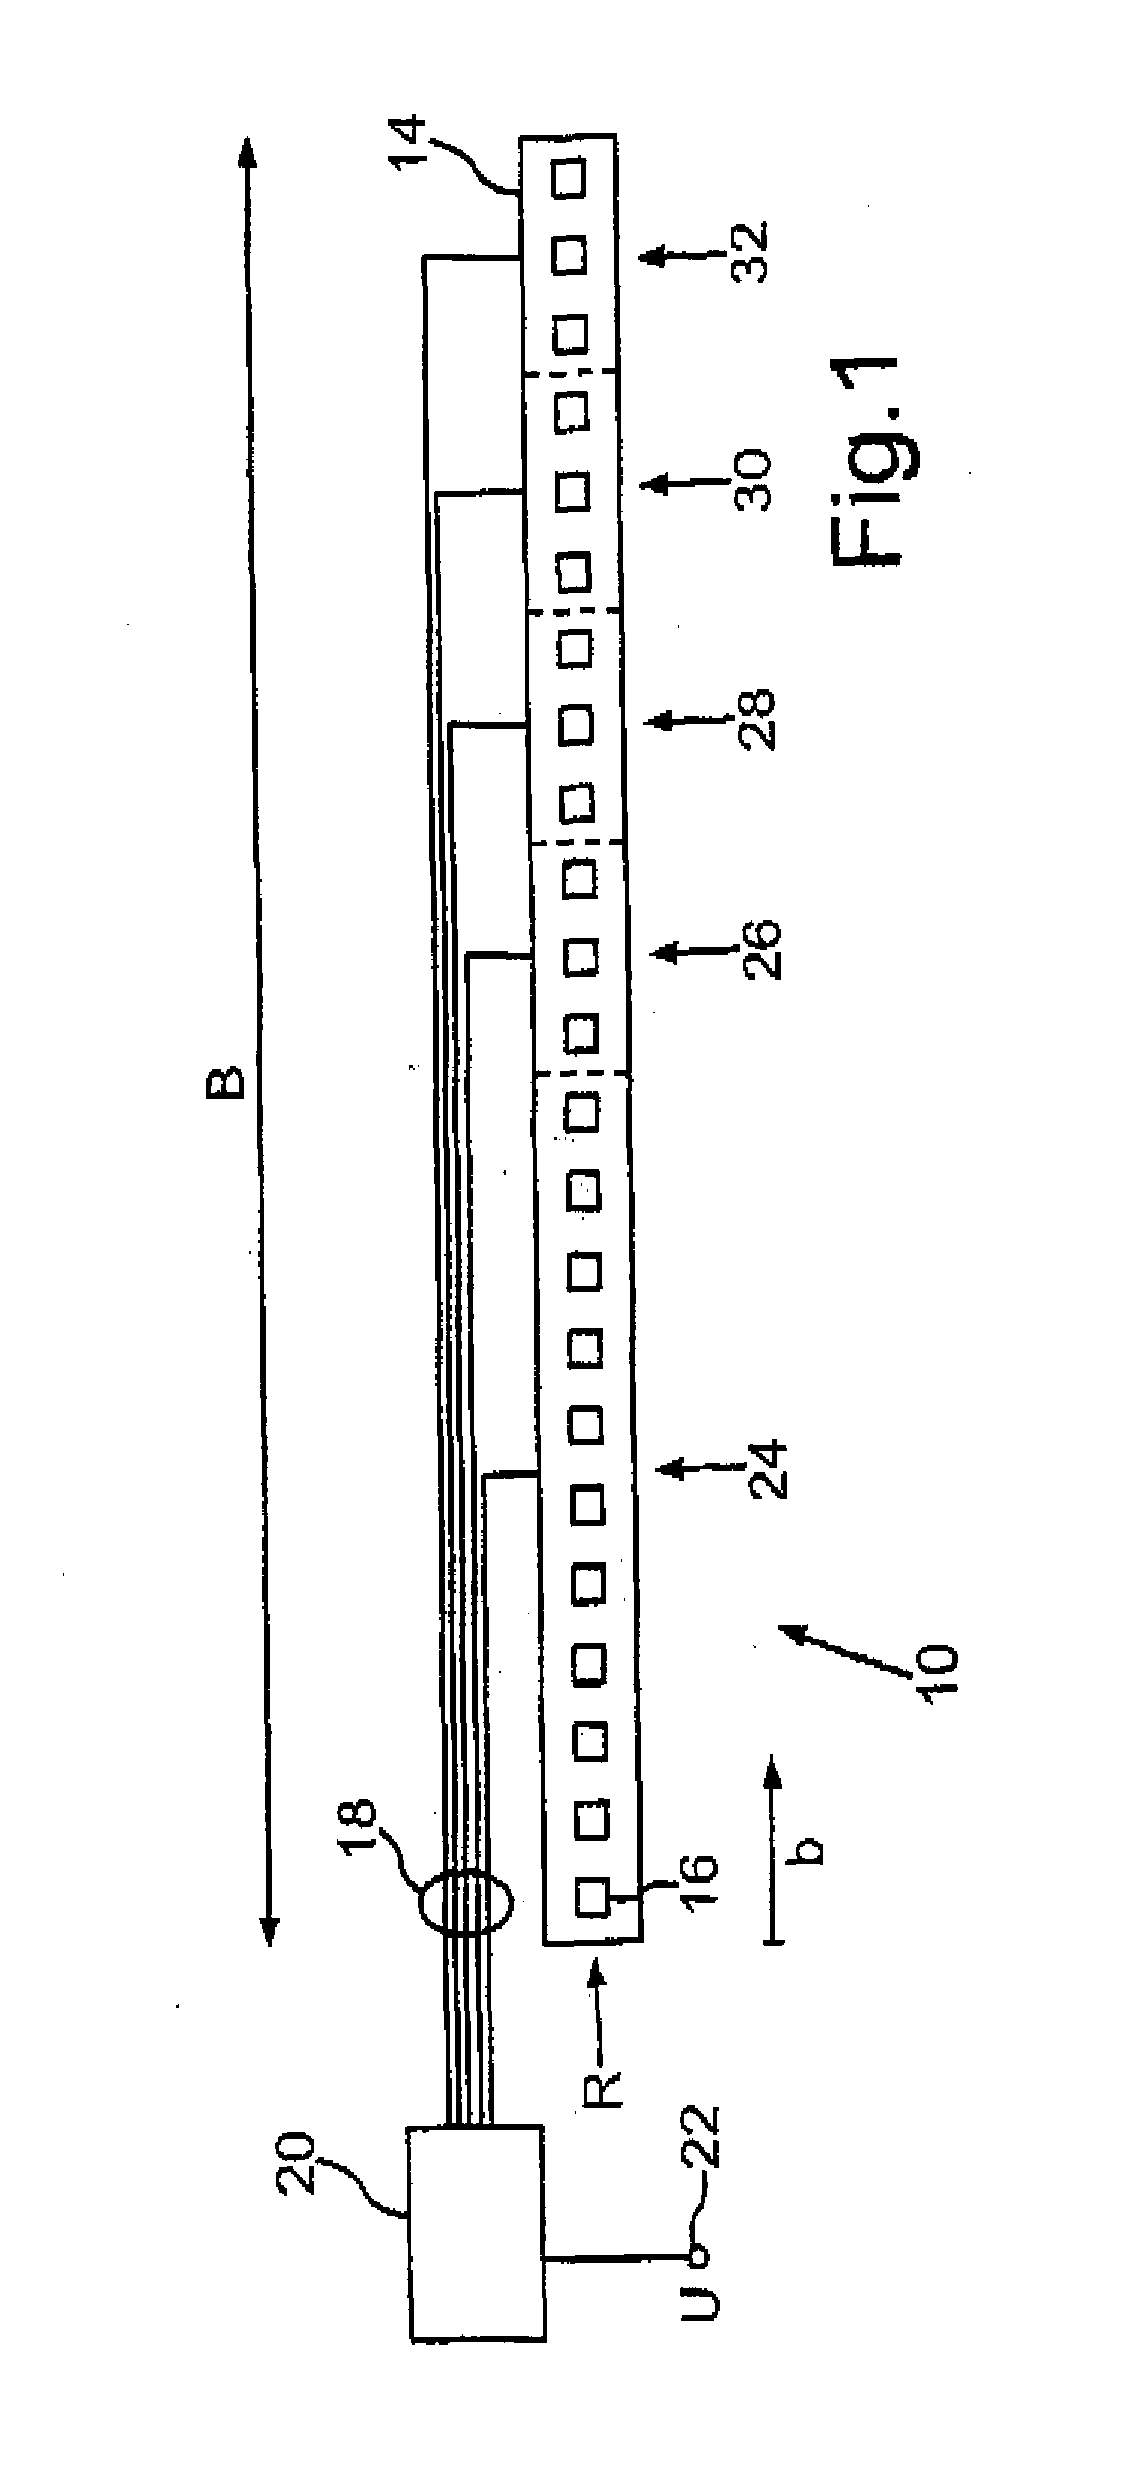 Turn signal lighting system for a motor vehicle, and method of operating a turn signal lighting system